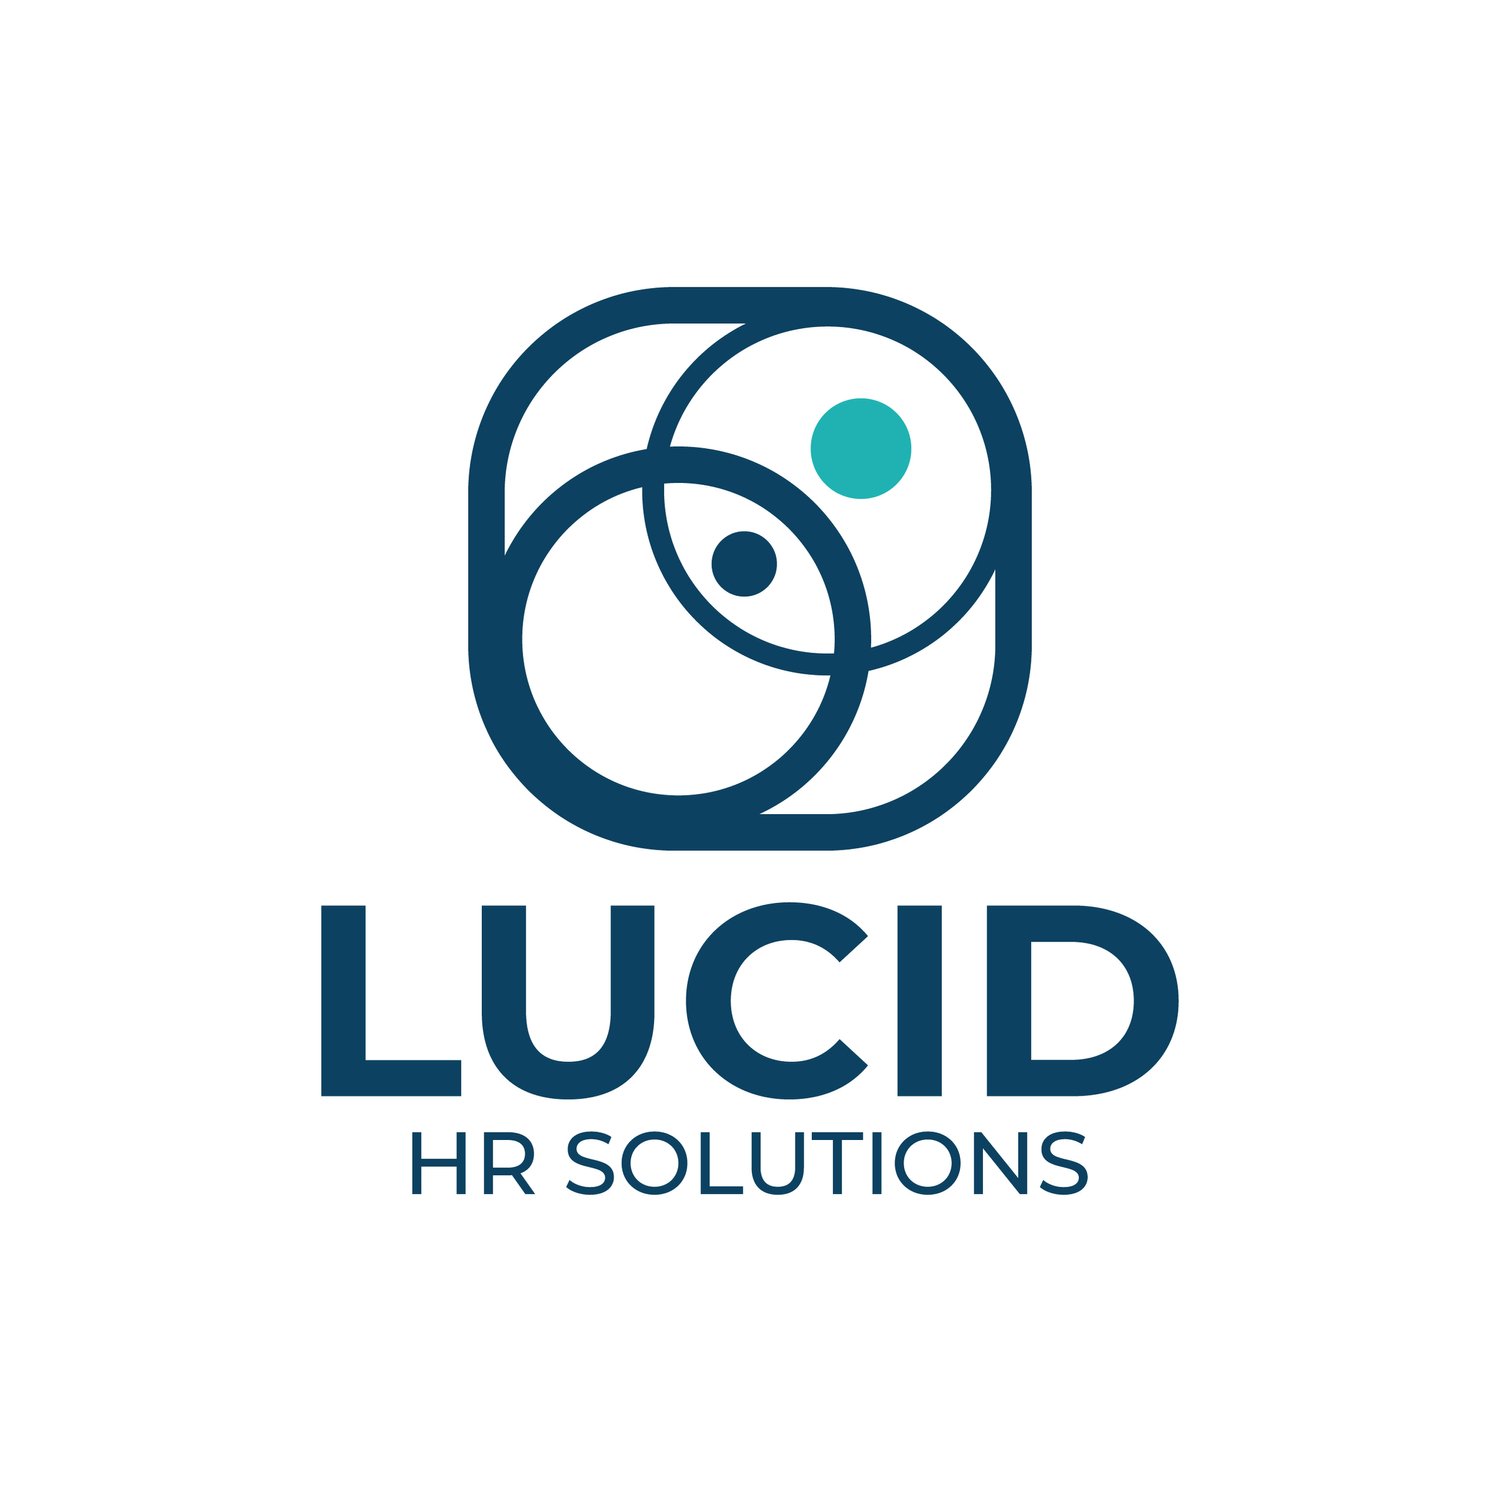 Lucid HR Solutions